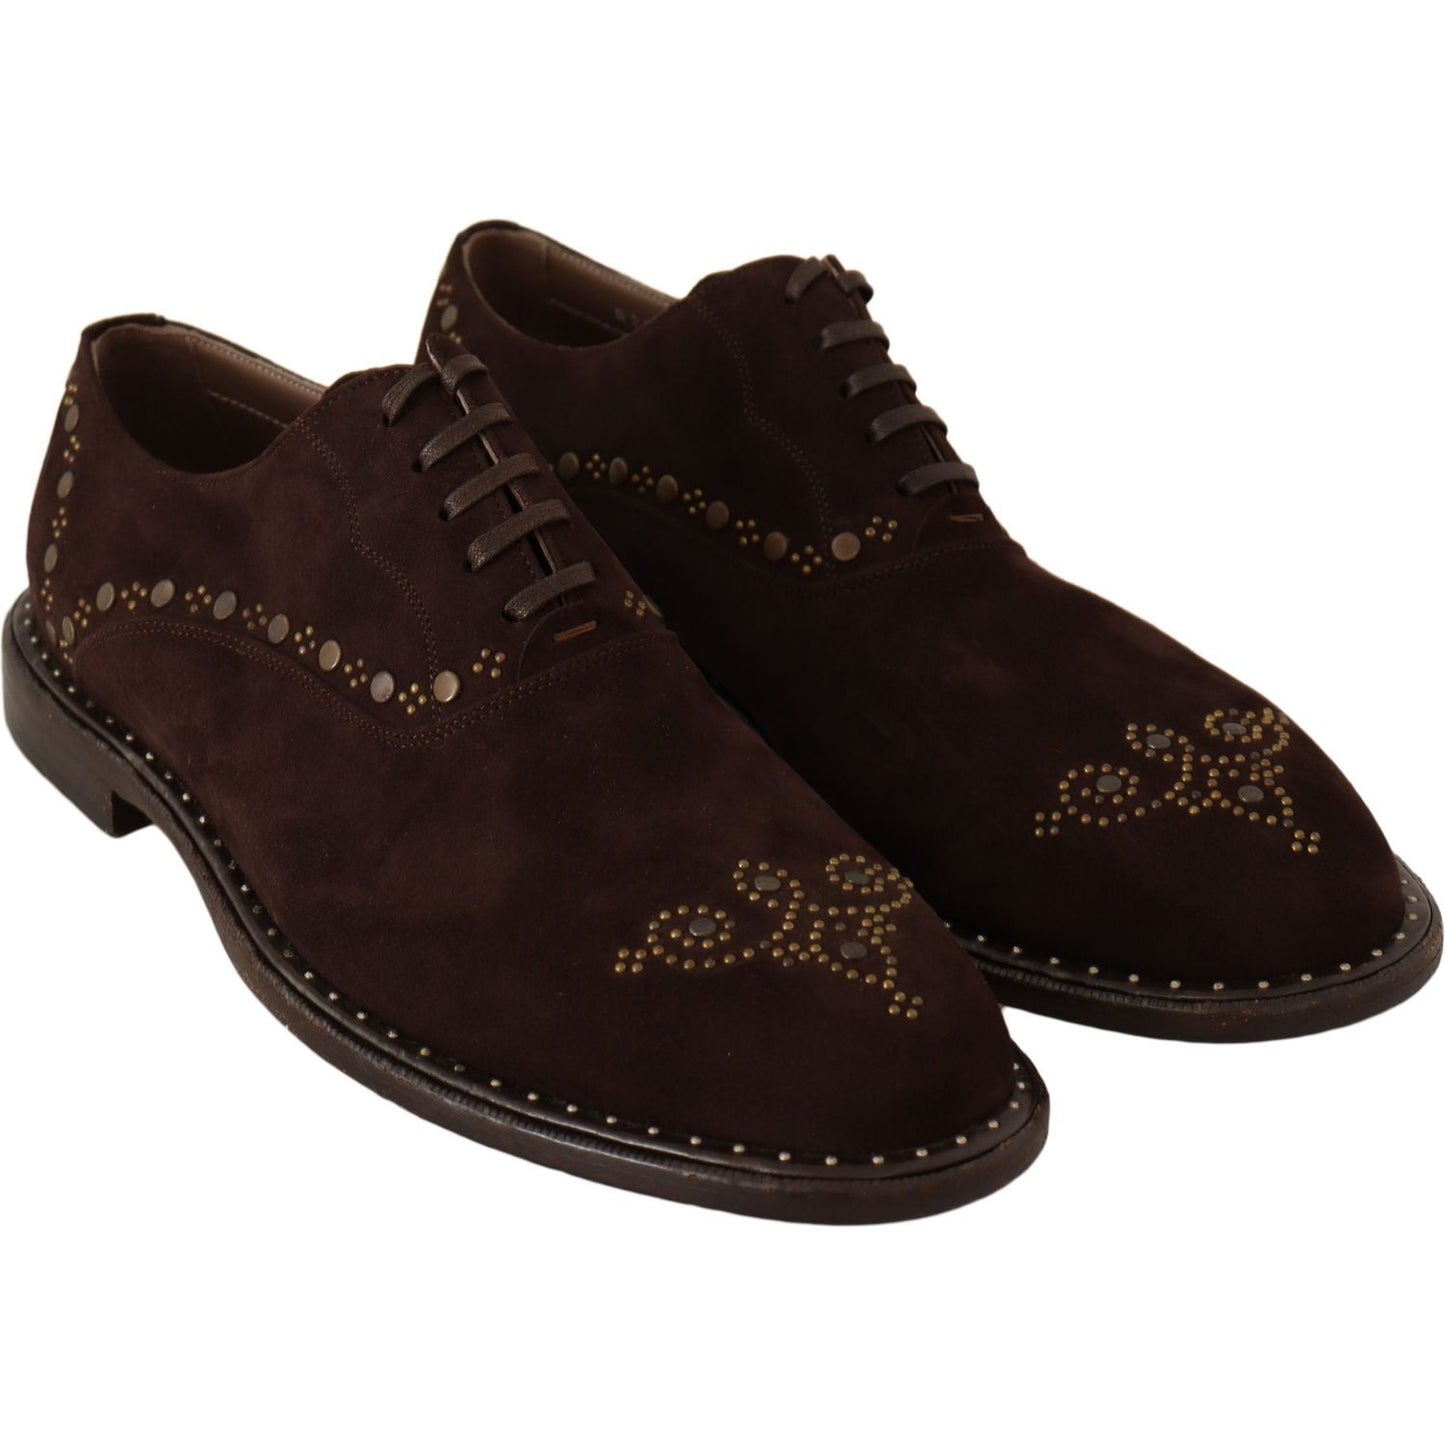 Dolce & Gabbana Elegant Brown Suede Studded Derby Shoes brown-suede-marsala-derby-studded-shoes Dress Shoes IMG_0019-scaled-c2ee56fd-a4e.jpg